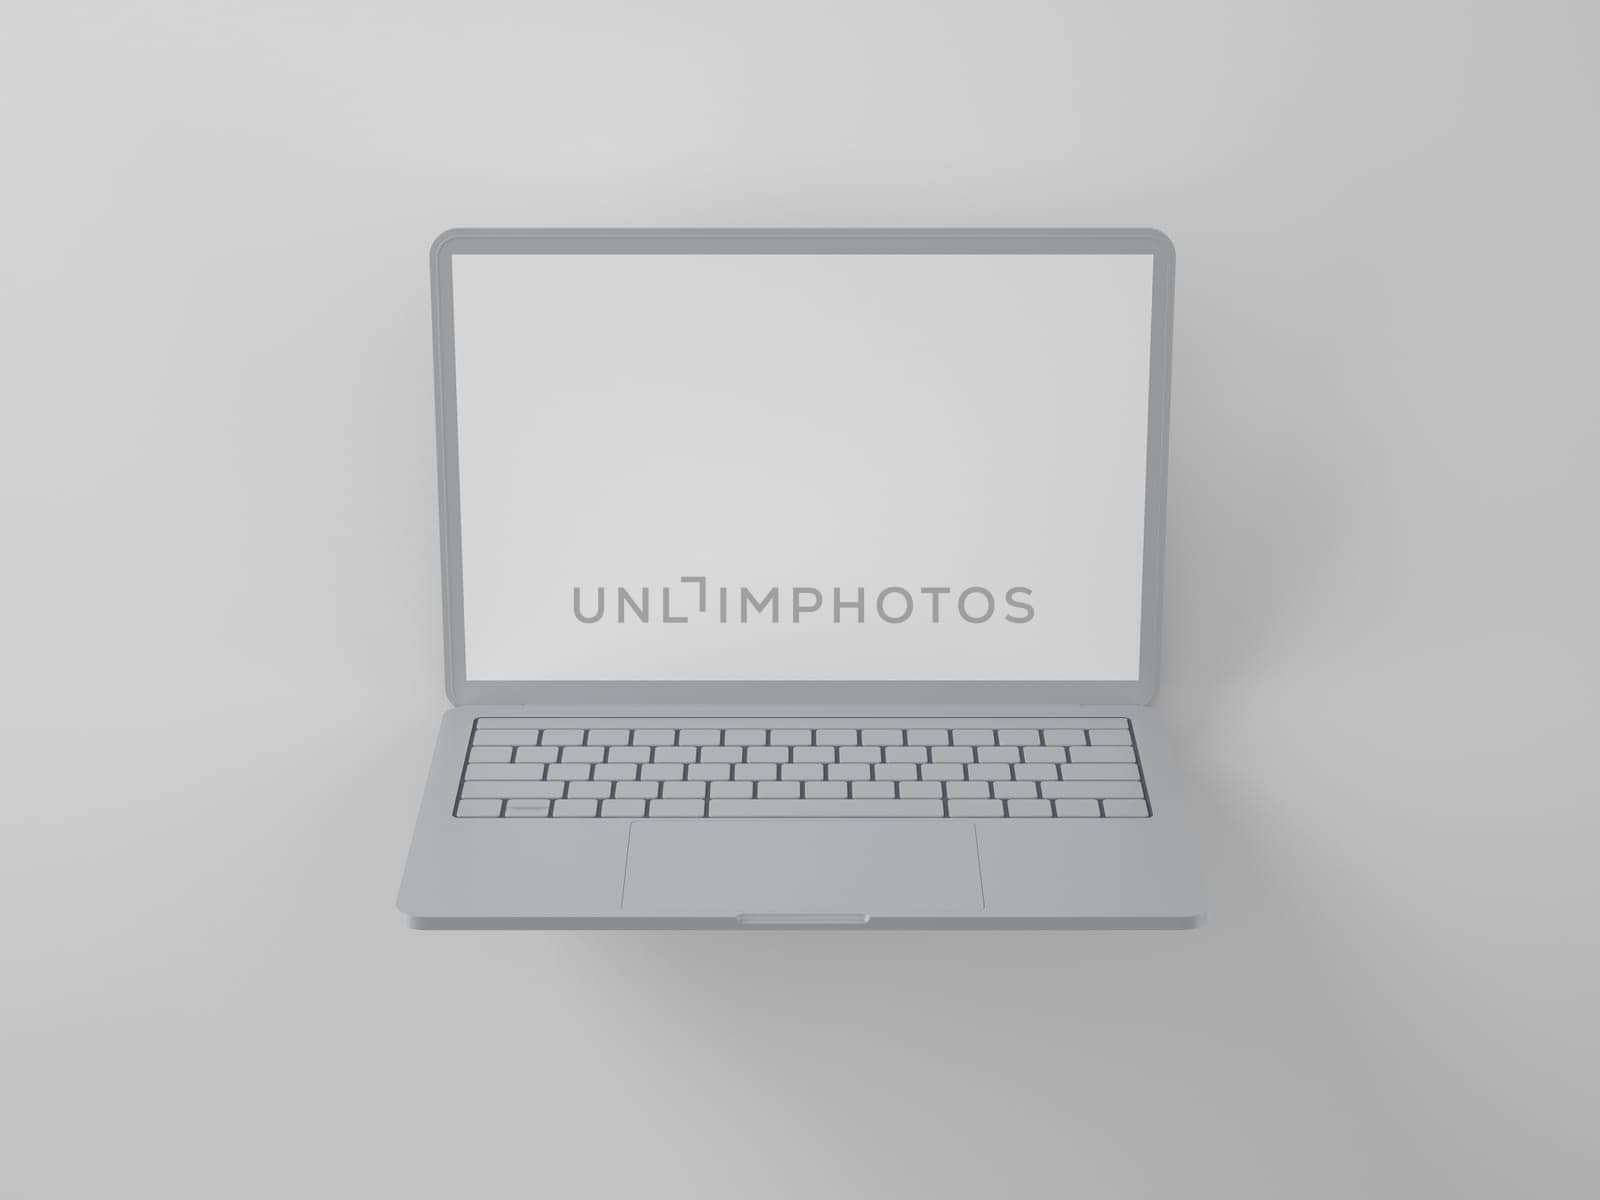 An open thin laptop on a light background by Mastak80